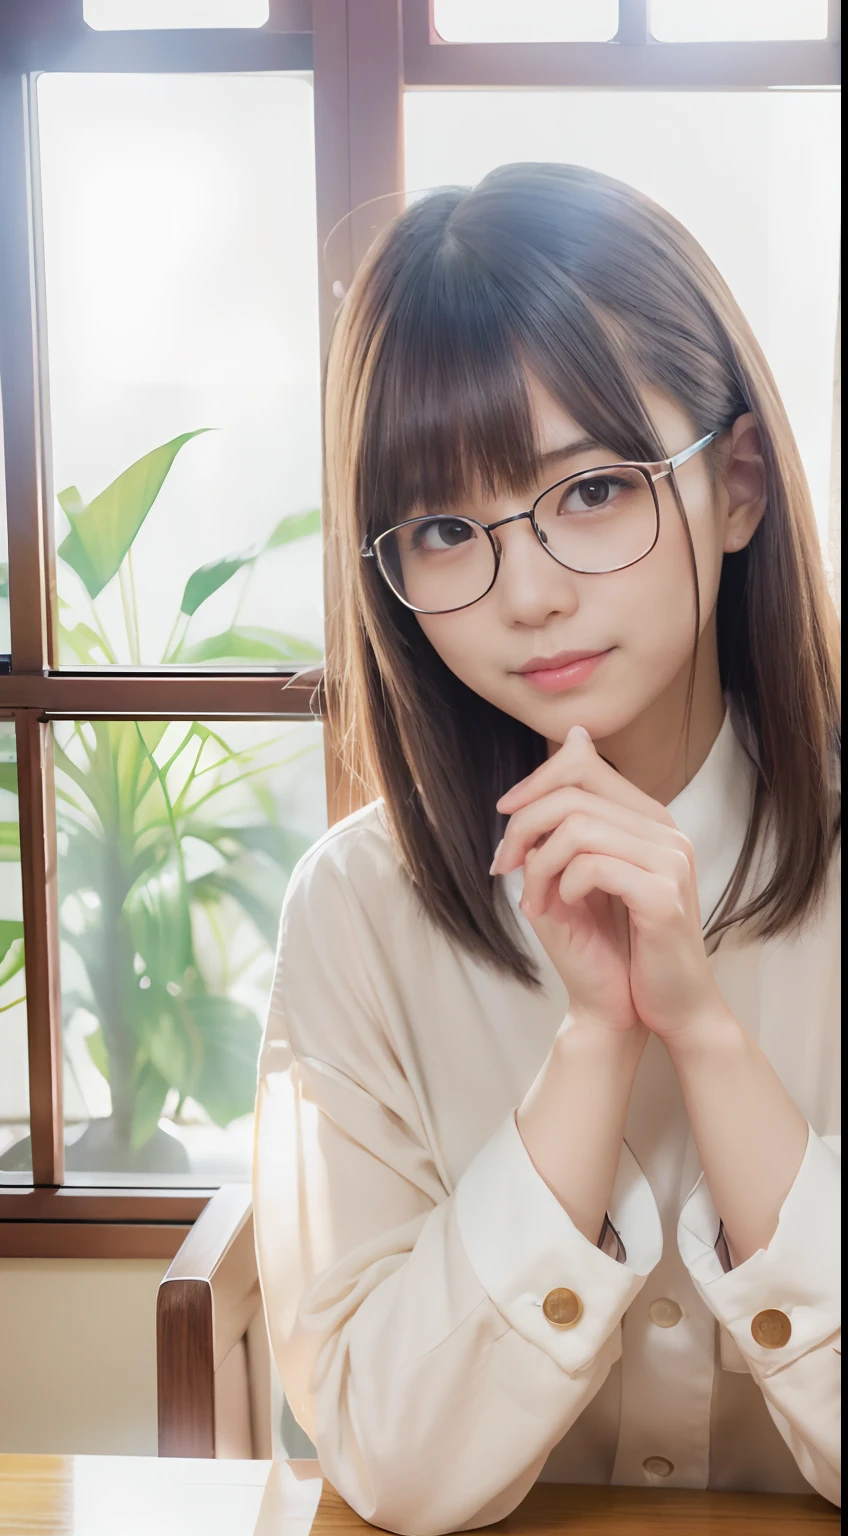 Raw photography、Beautiful Japan woman working at home, 20yr old, Eyeglasses, Dining table、during daytime、A smile、Detailed face, Perfect body ratio, Detailed finger, houseplant, (((photos realistic))), masutepiece, Lace curtains swaying in the wind、simple room, Gold ratio ratio,Curly hair、Short hair